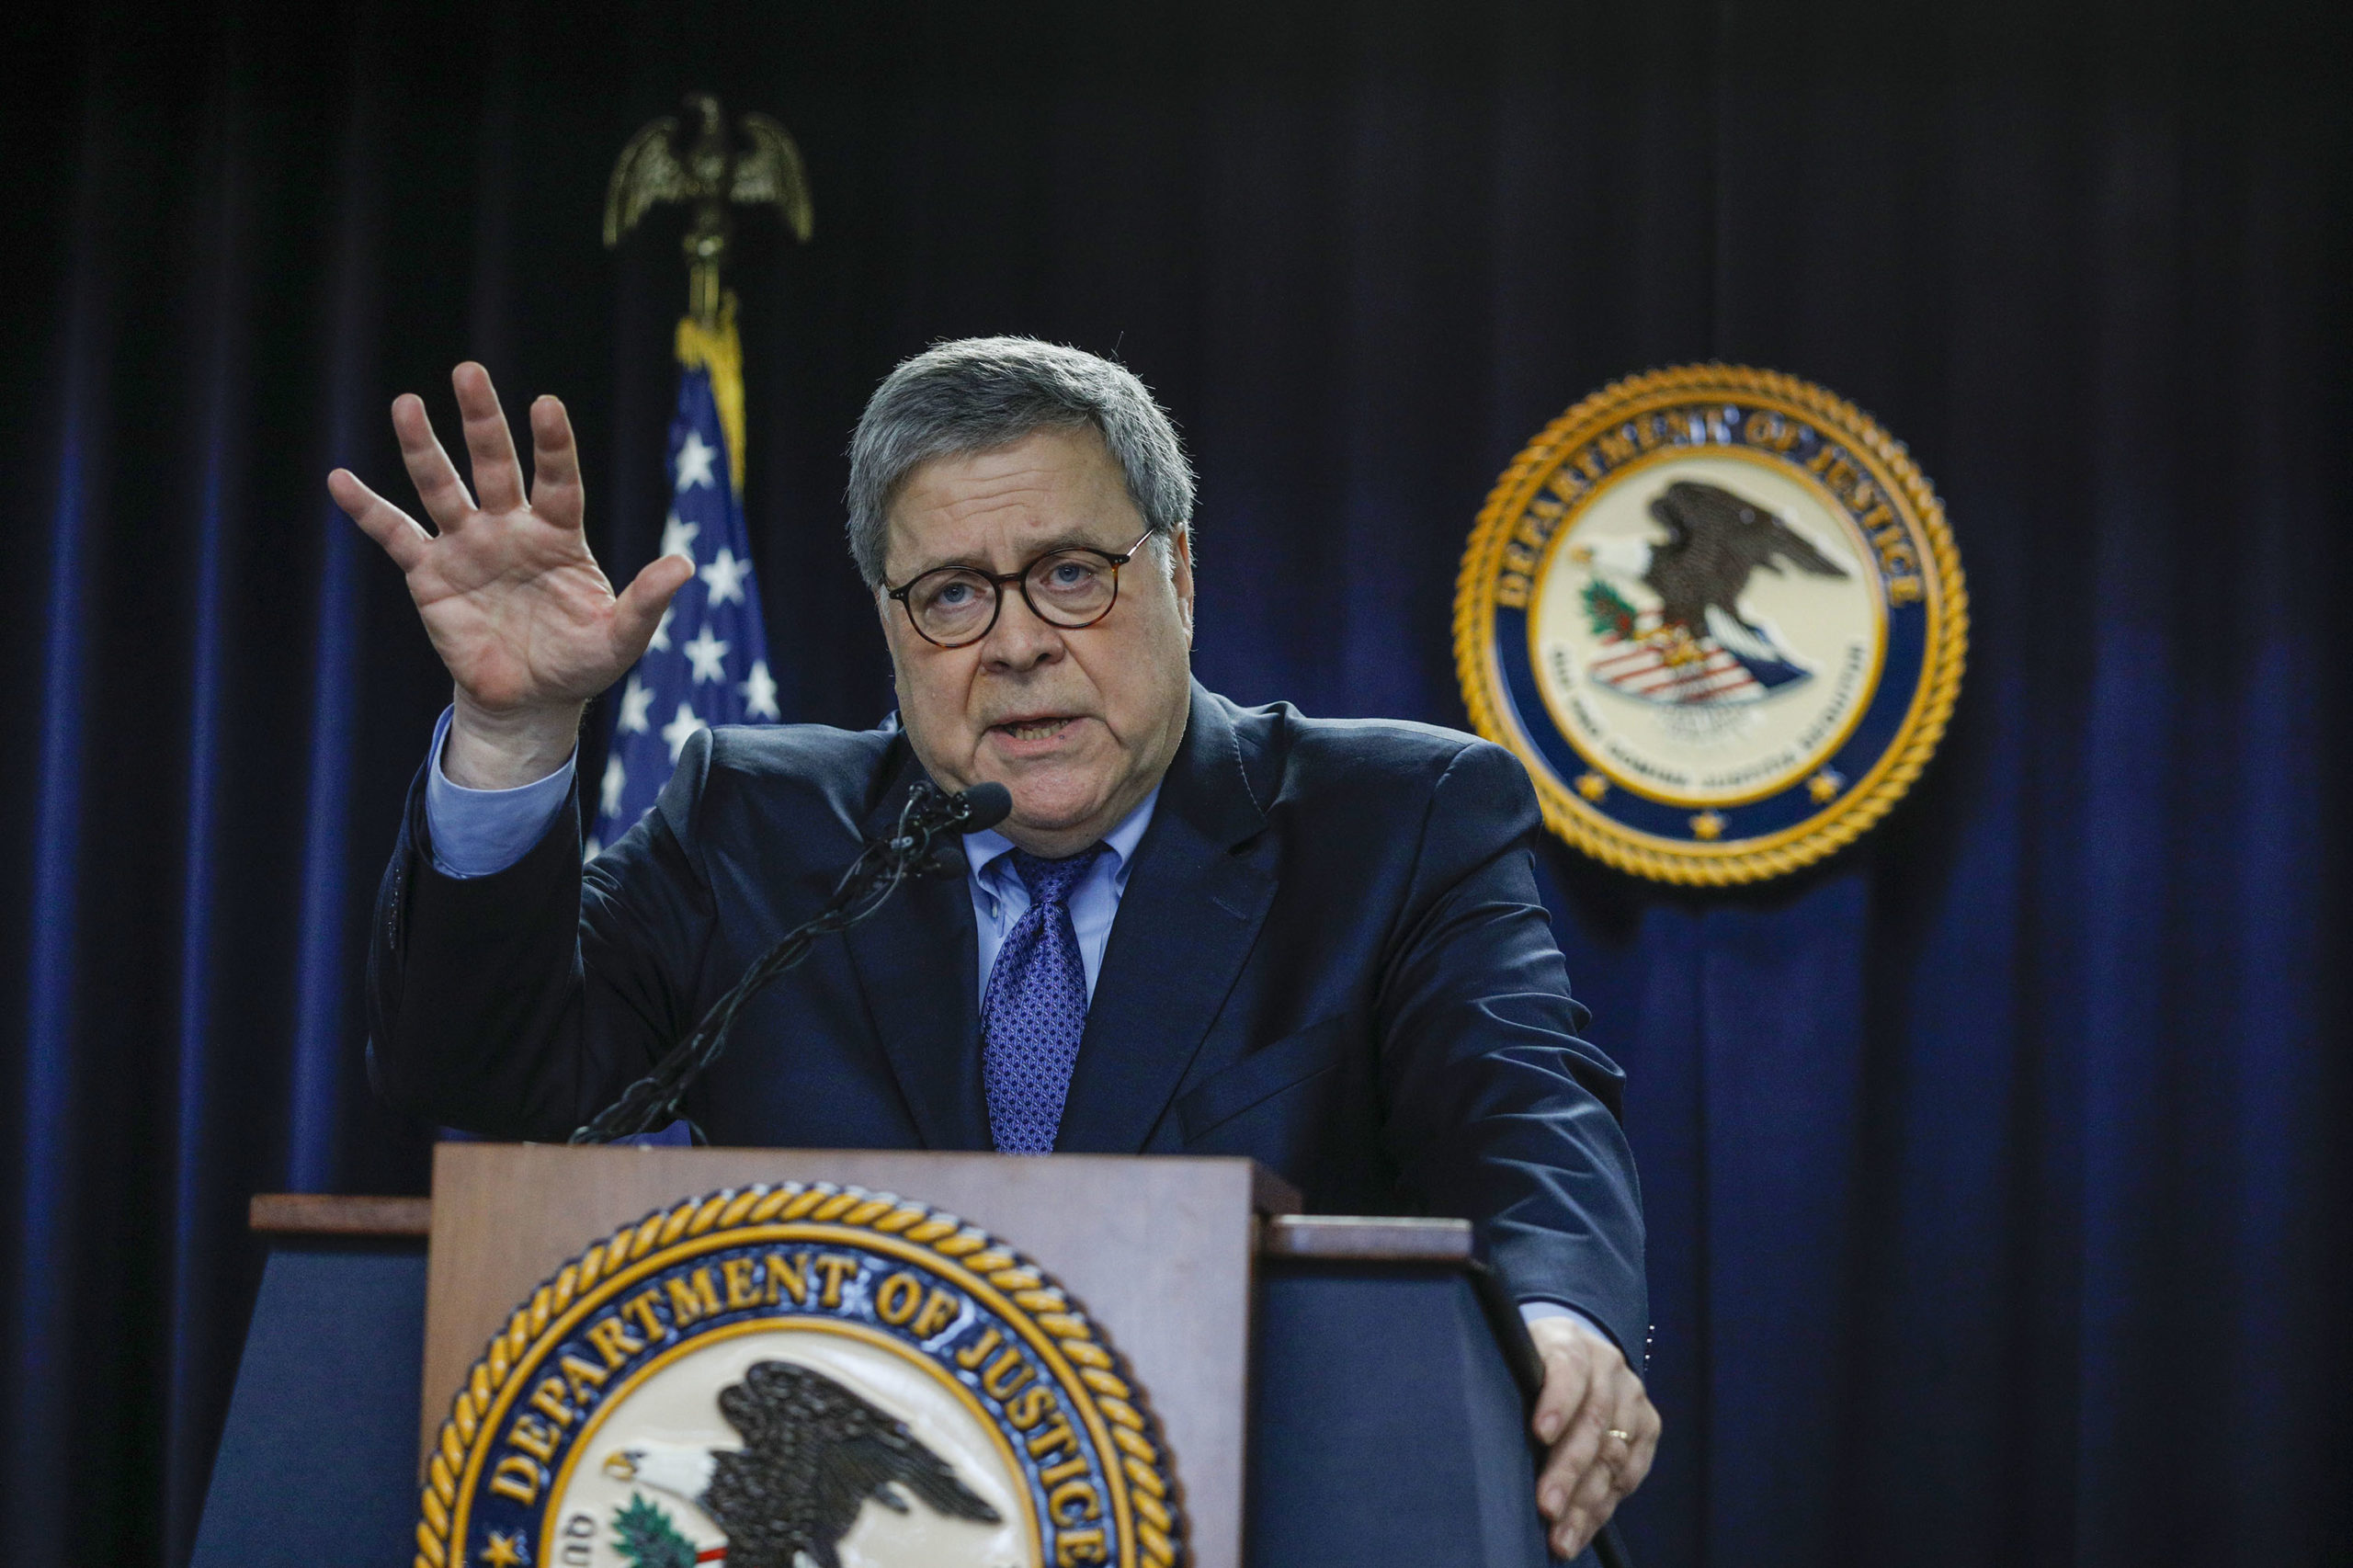 Attorney General William Barr, pictured in December 2019, ordered the Federal Bureau of Prisons in July 2019 to resume executions. (Bill Pugliano/Getty Images)